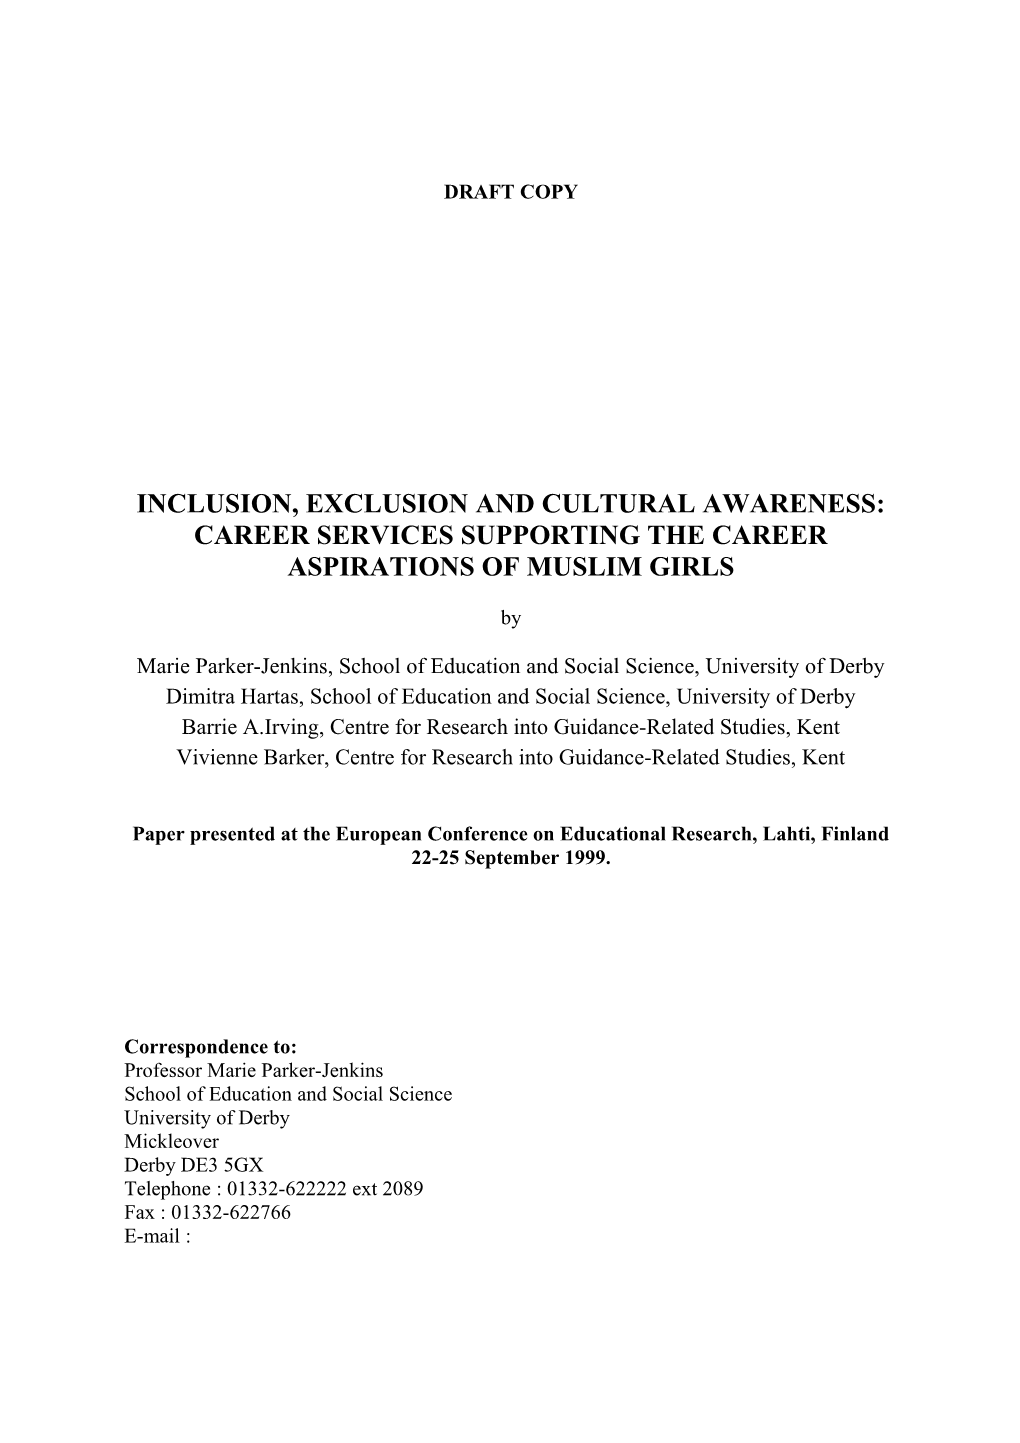 Inclusion, Exclusion and Cultural Awareness: Career Services Supporting the Career Aspirations